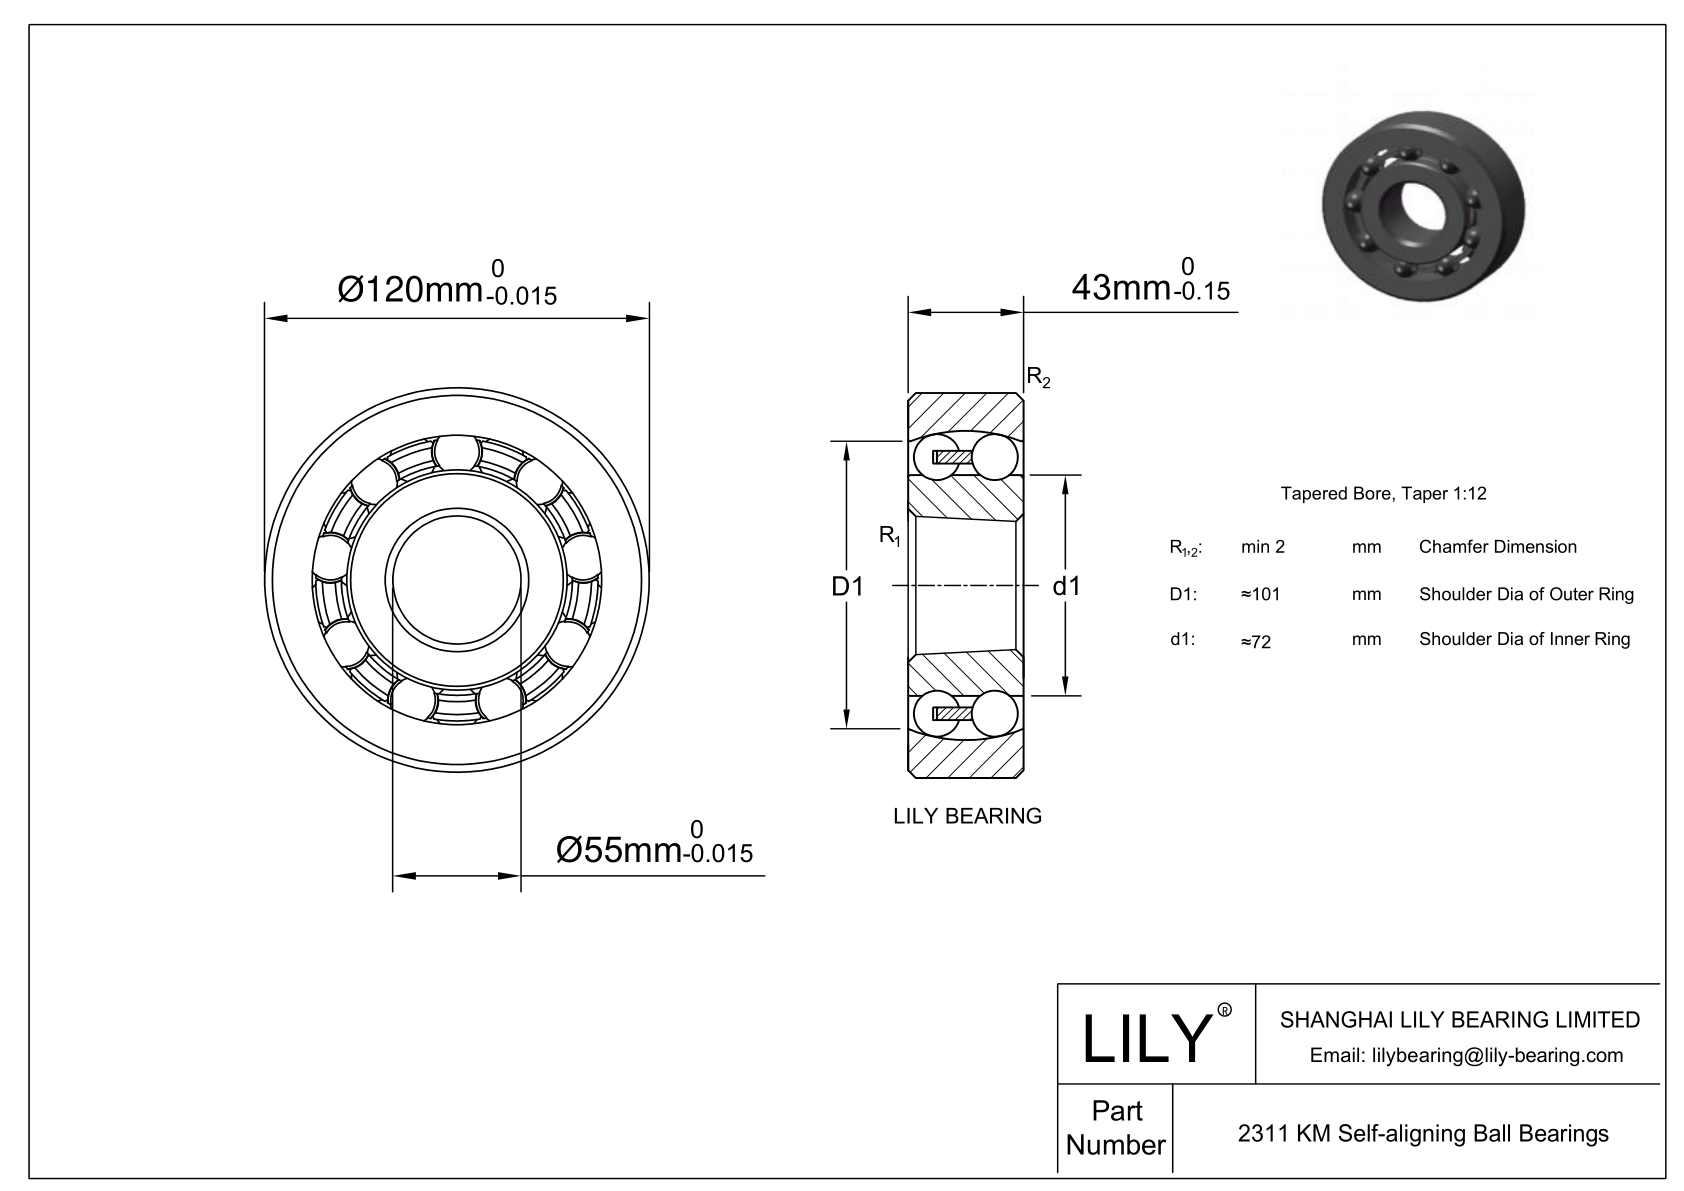 S2311 KM Stainless Steel Self Aligning Ball Bearings cad drawing